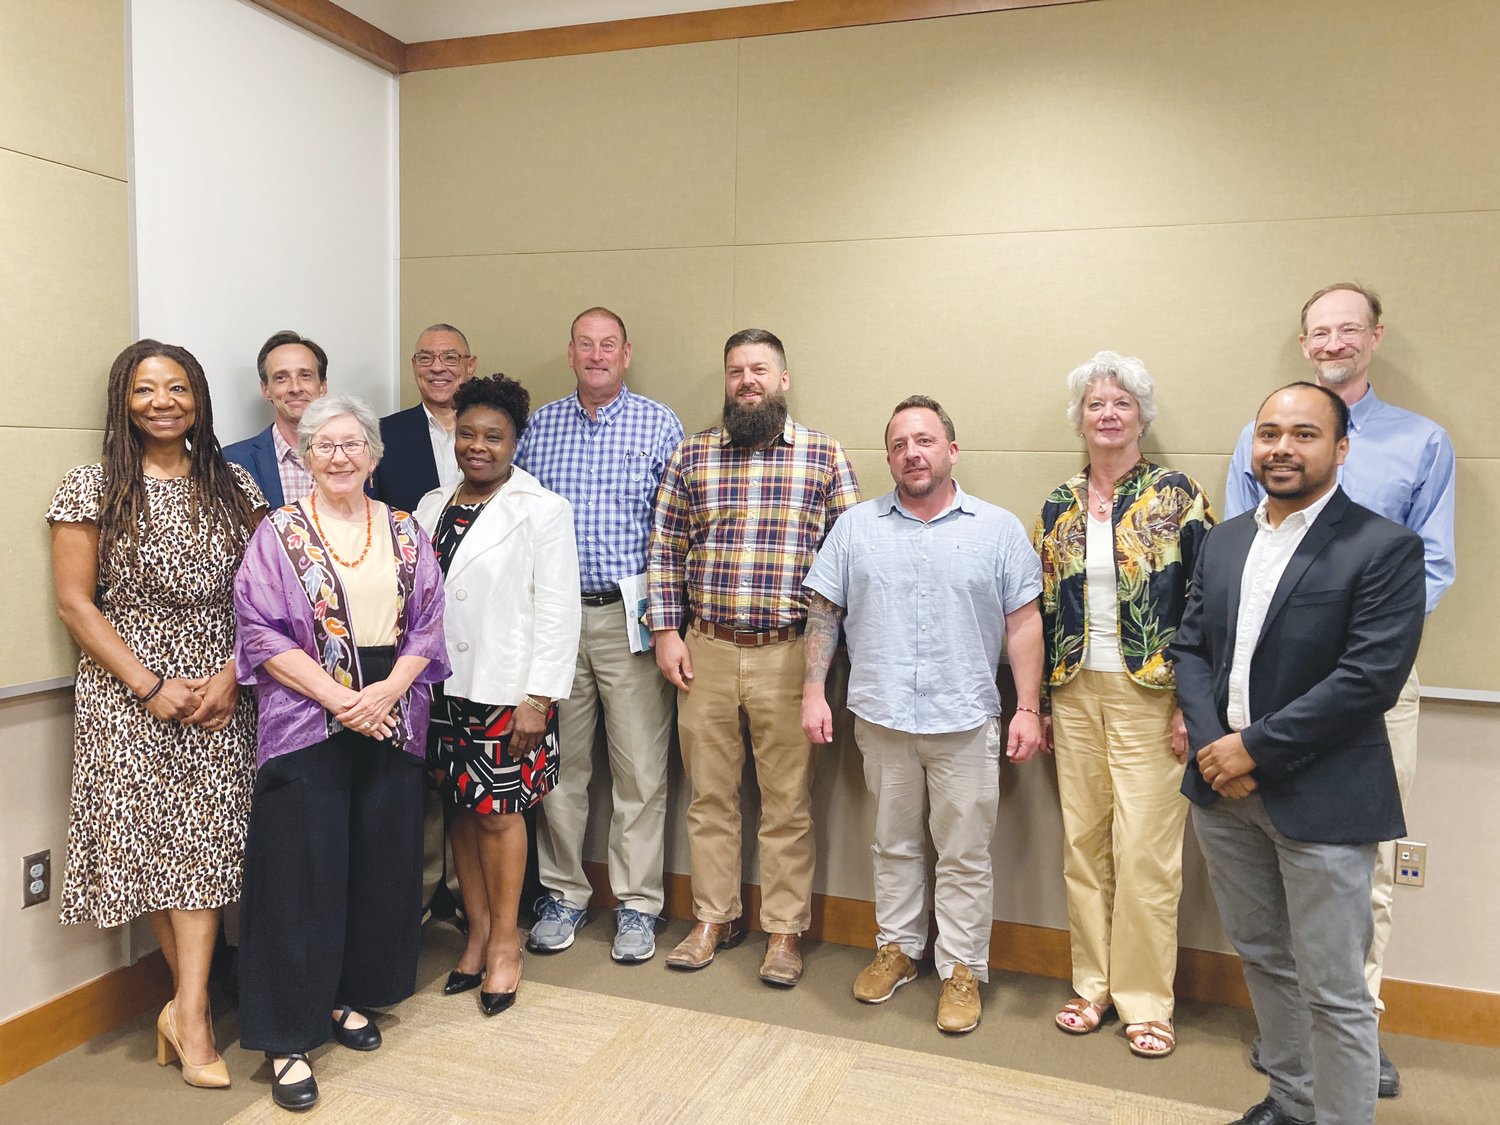 Pittsboro and Chatham County Commissioners met in joint session last Thursday to discuss the future of Chatham and improvements to Pittsboro's infrastrucutre.